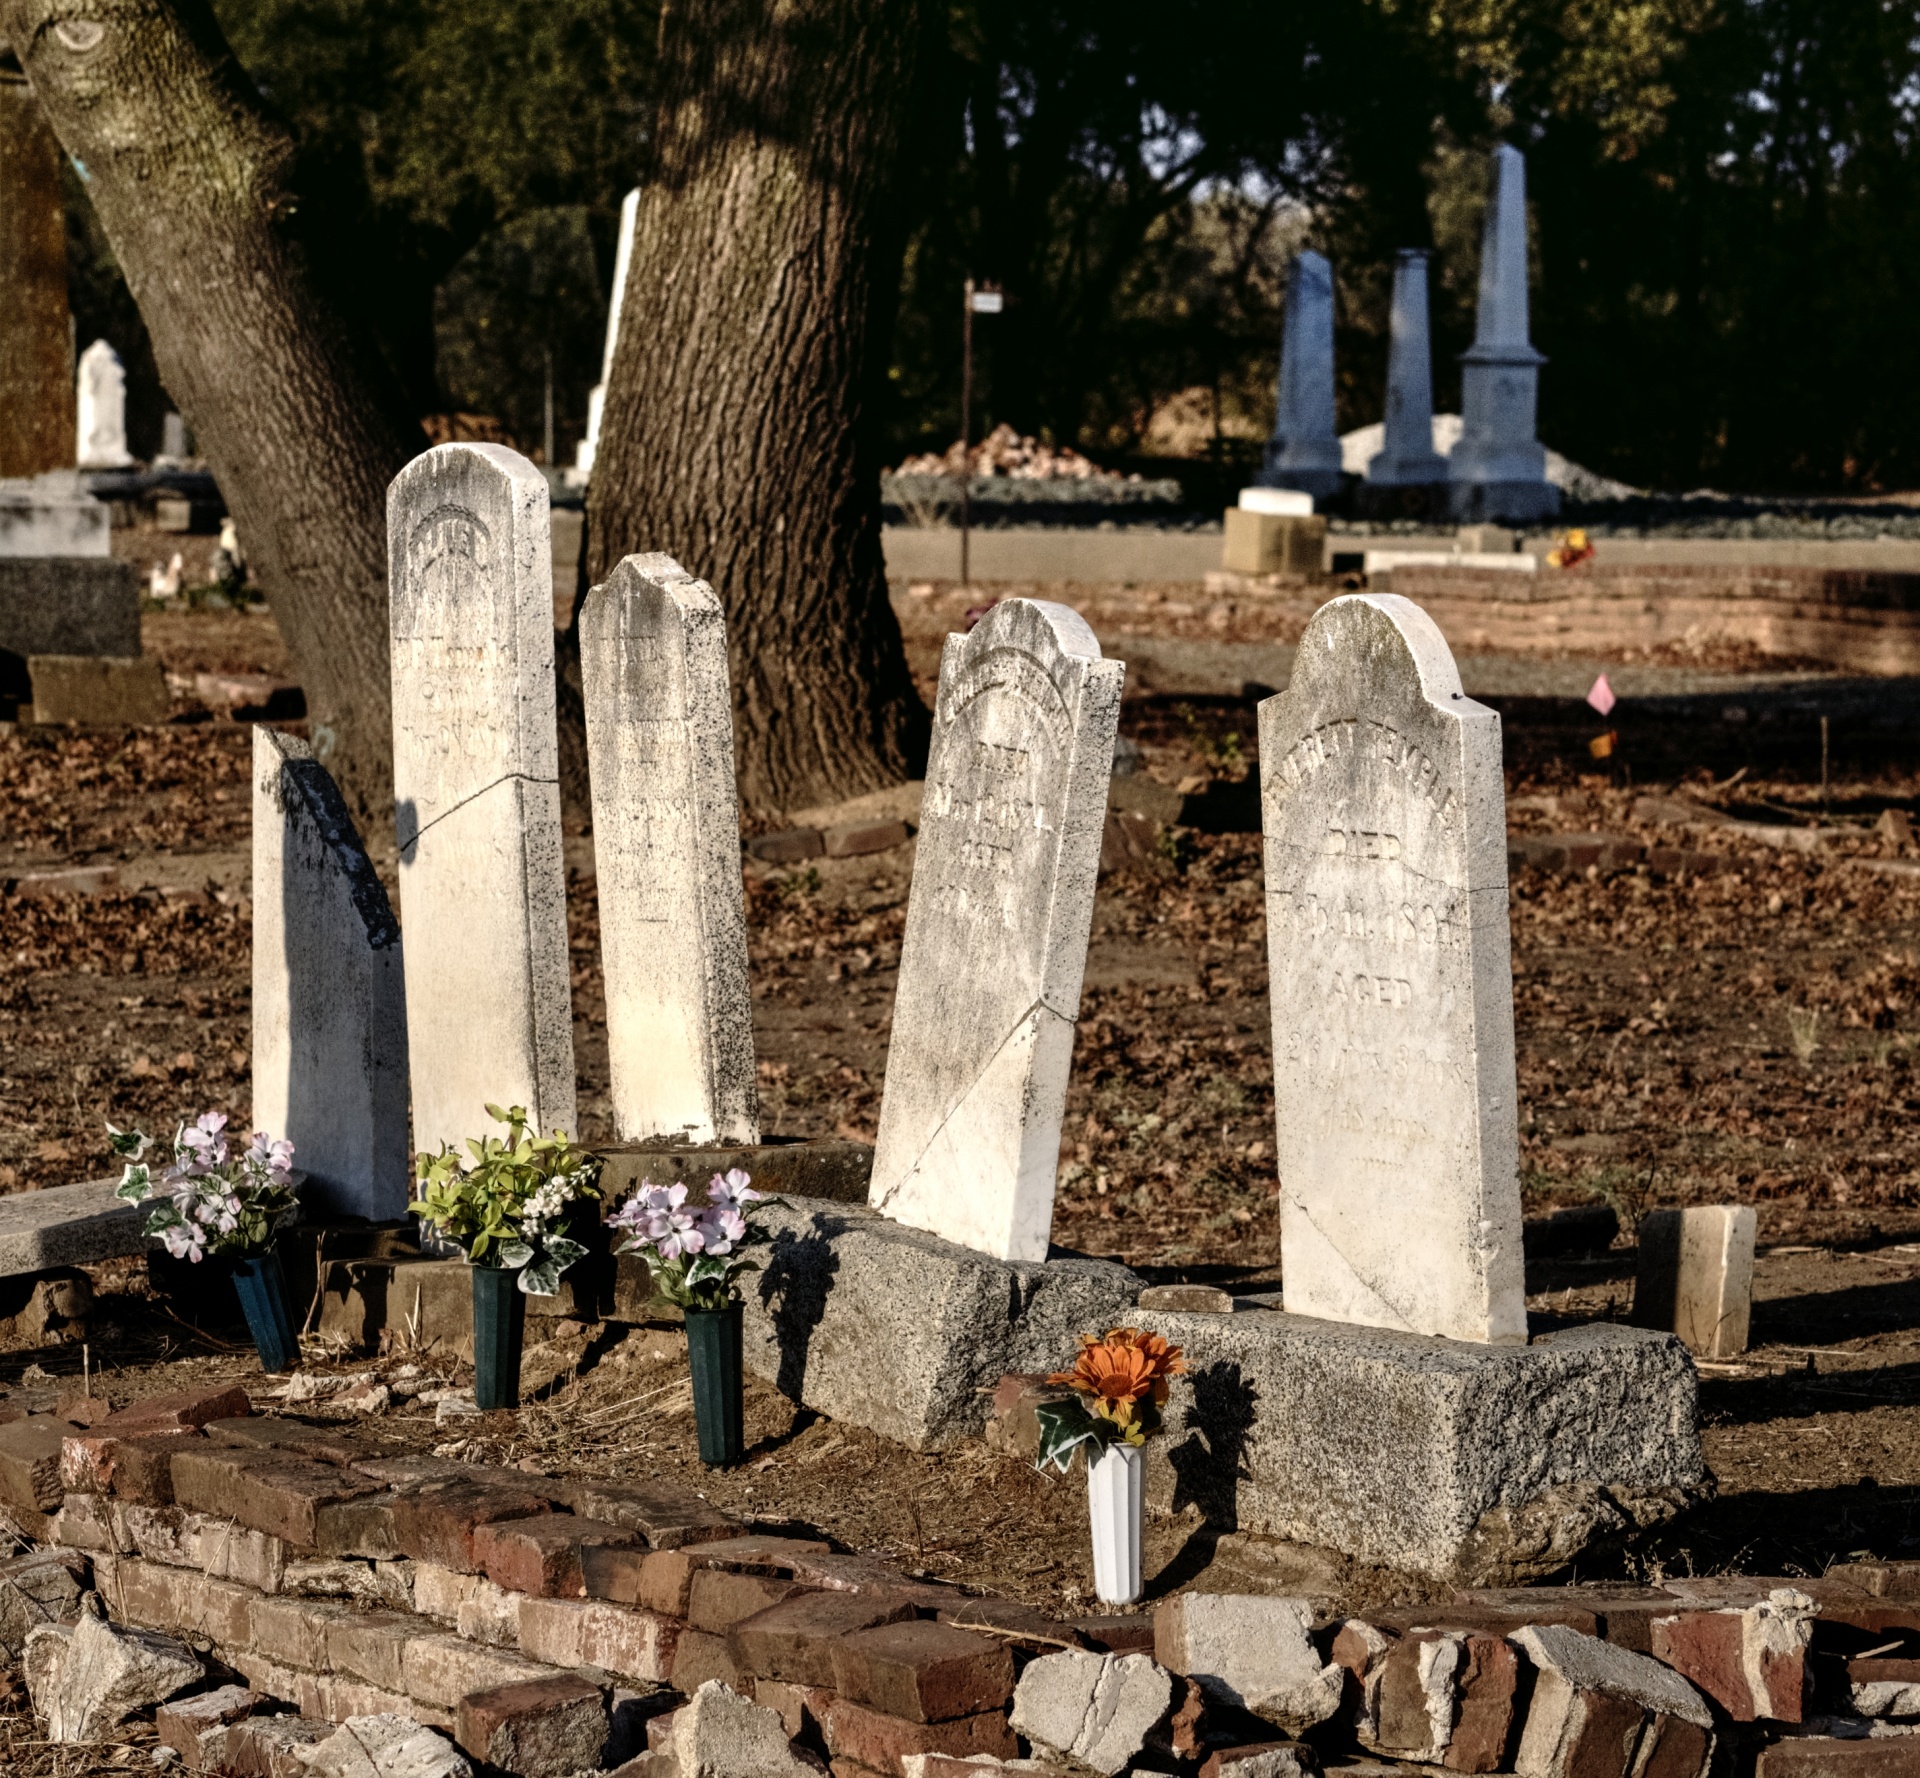 old cemetery near Sacramento, Marysville, California with graves dating back to 1800s